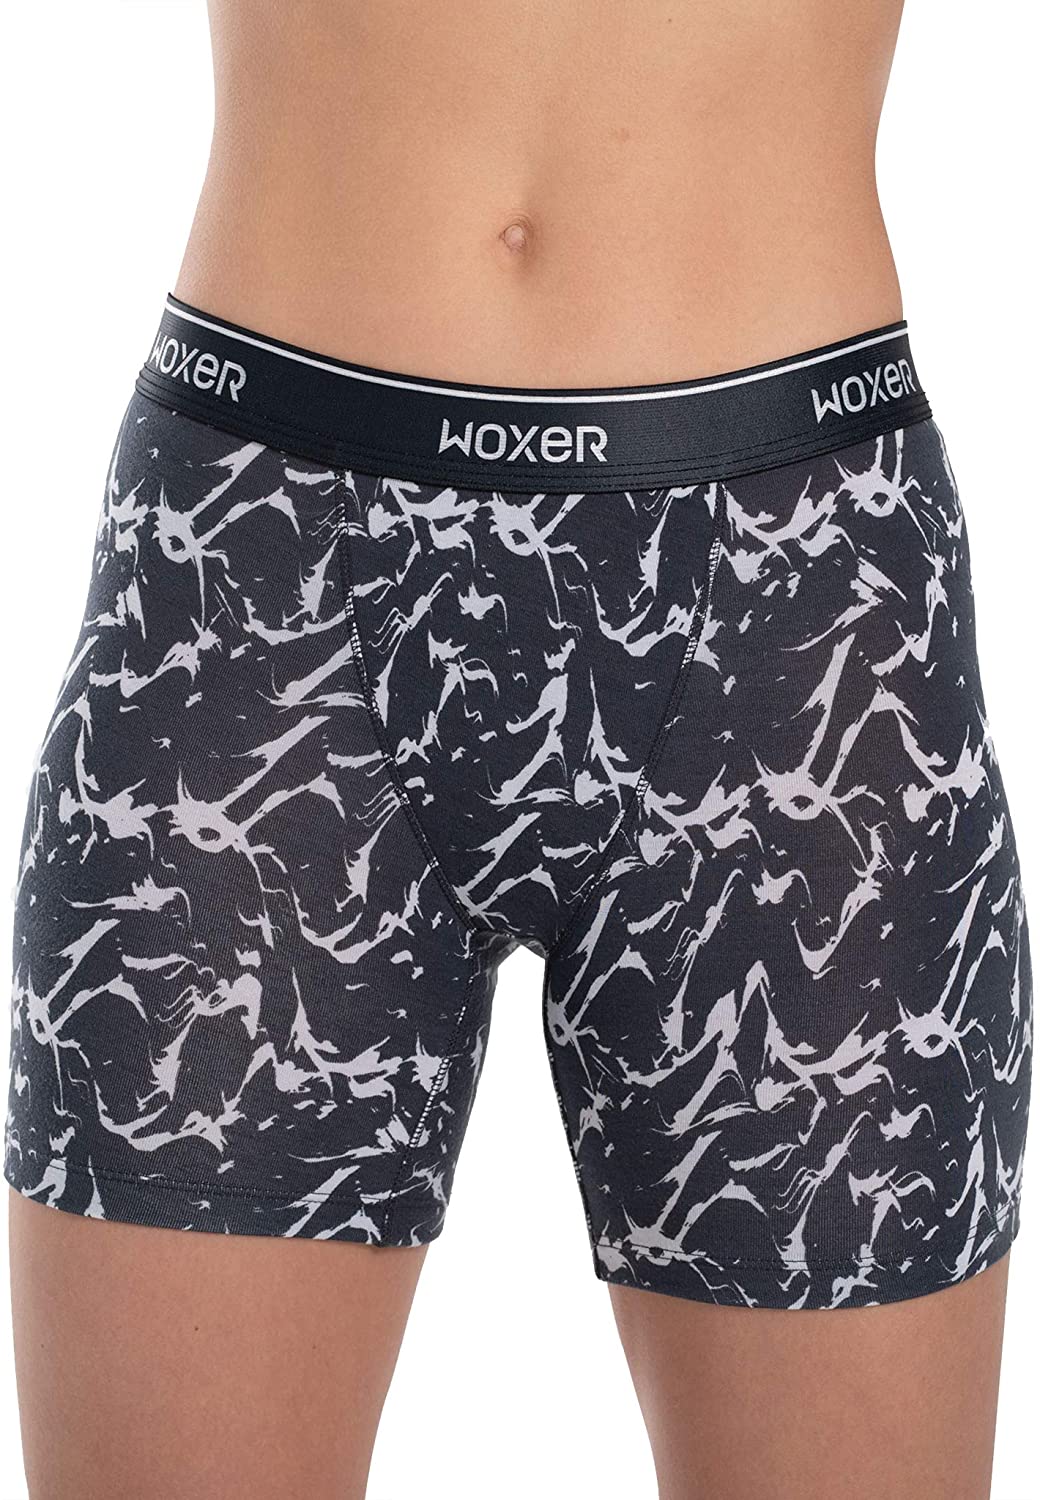 Woxer Women's Baller 5 High Waisted Boxer Briefs In Turquoise